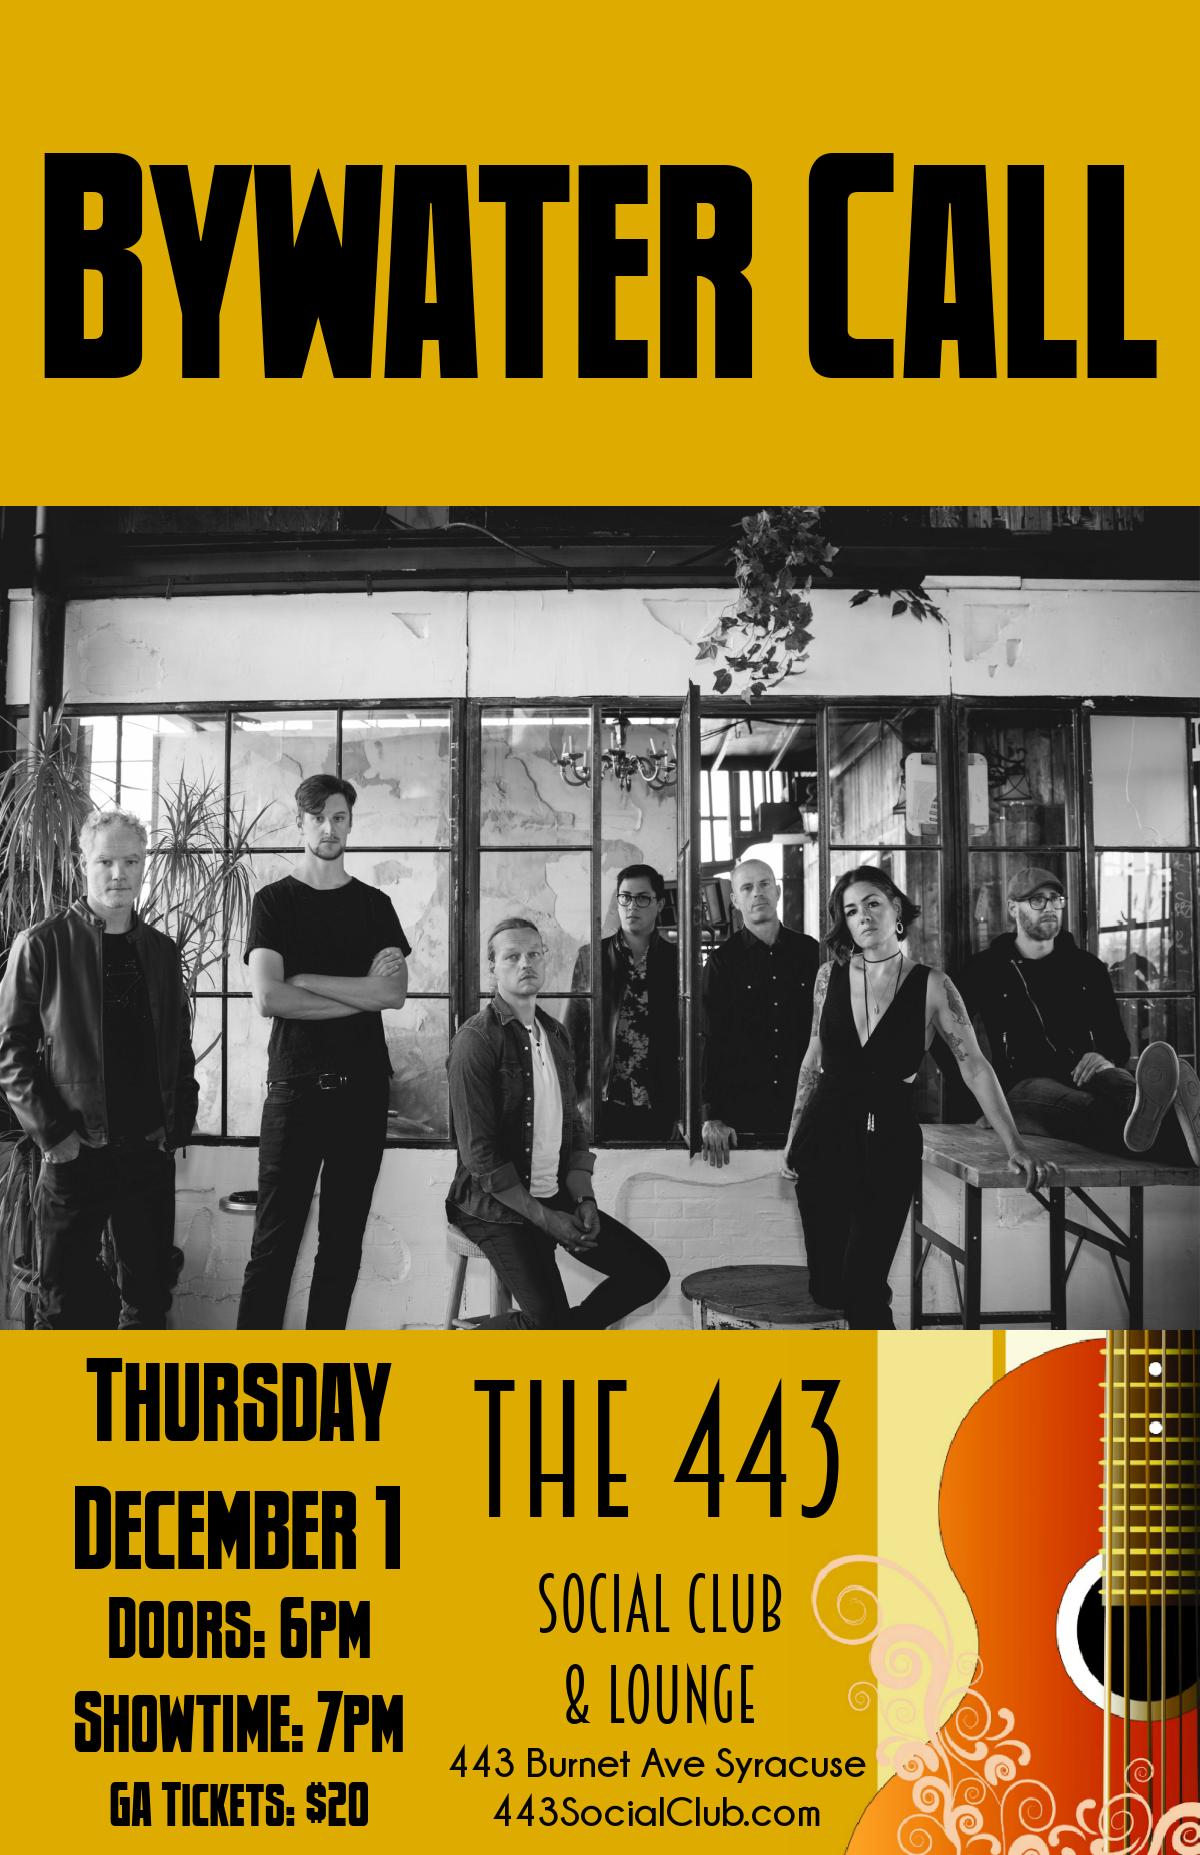 Bywater Call at the 443